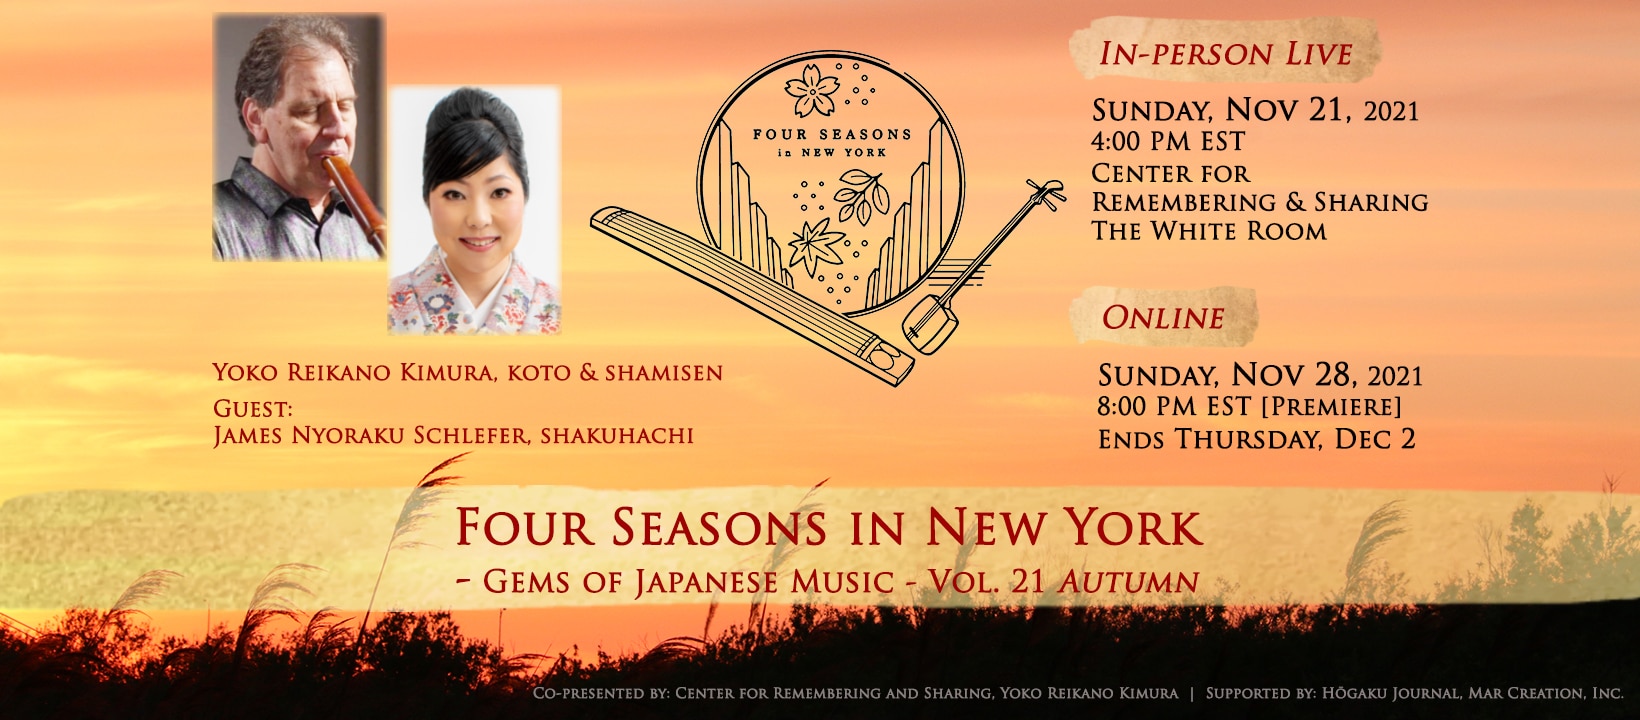 Four Seasons in NY: Gems of Japanese Music Vol. 21